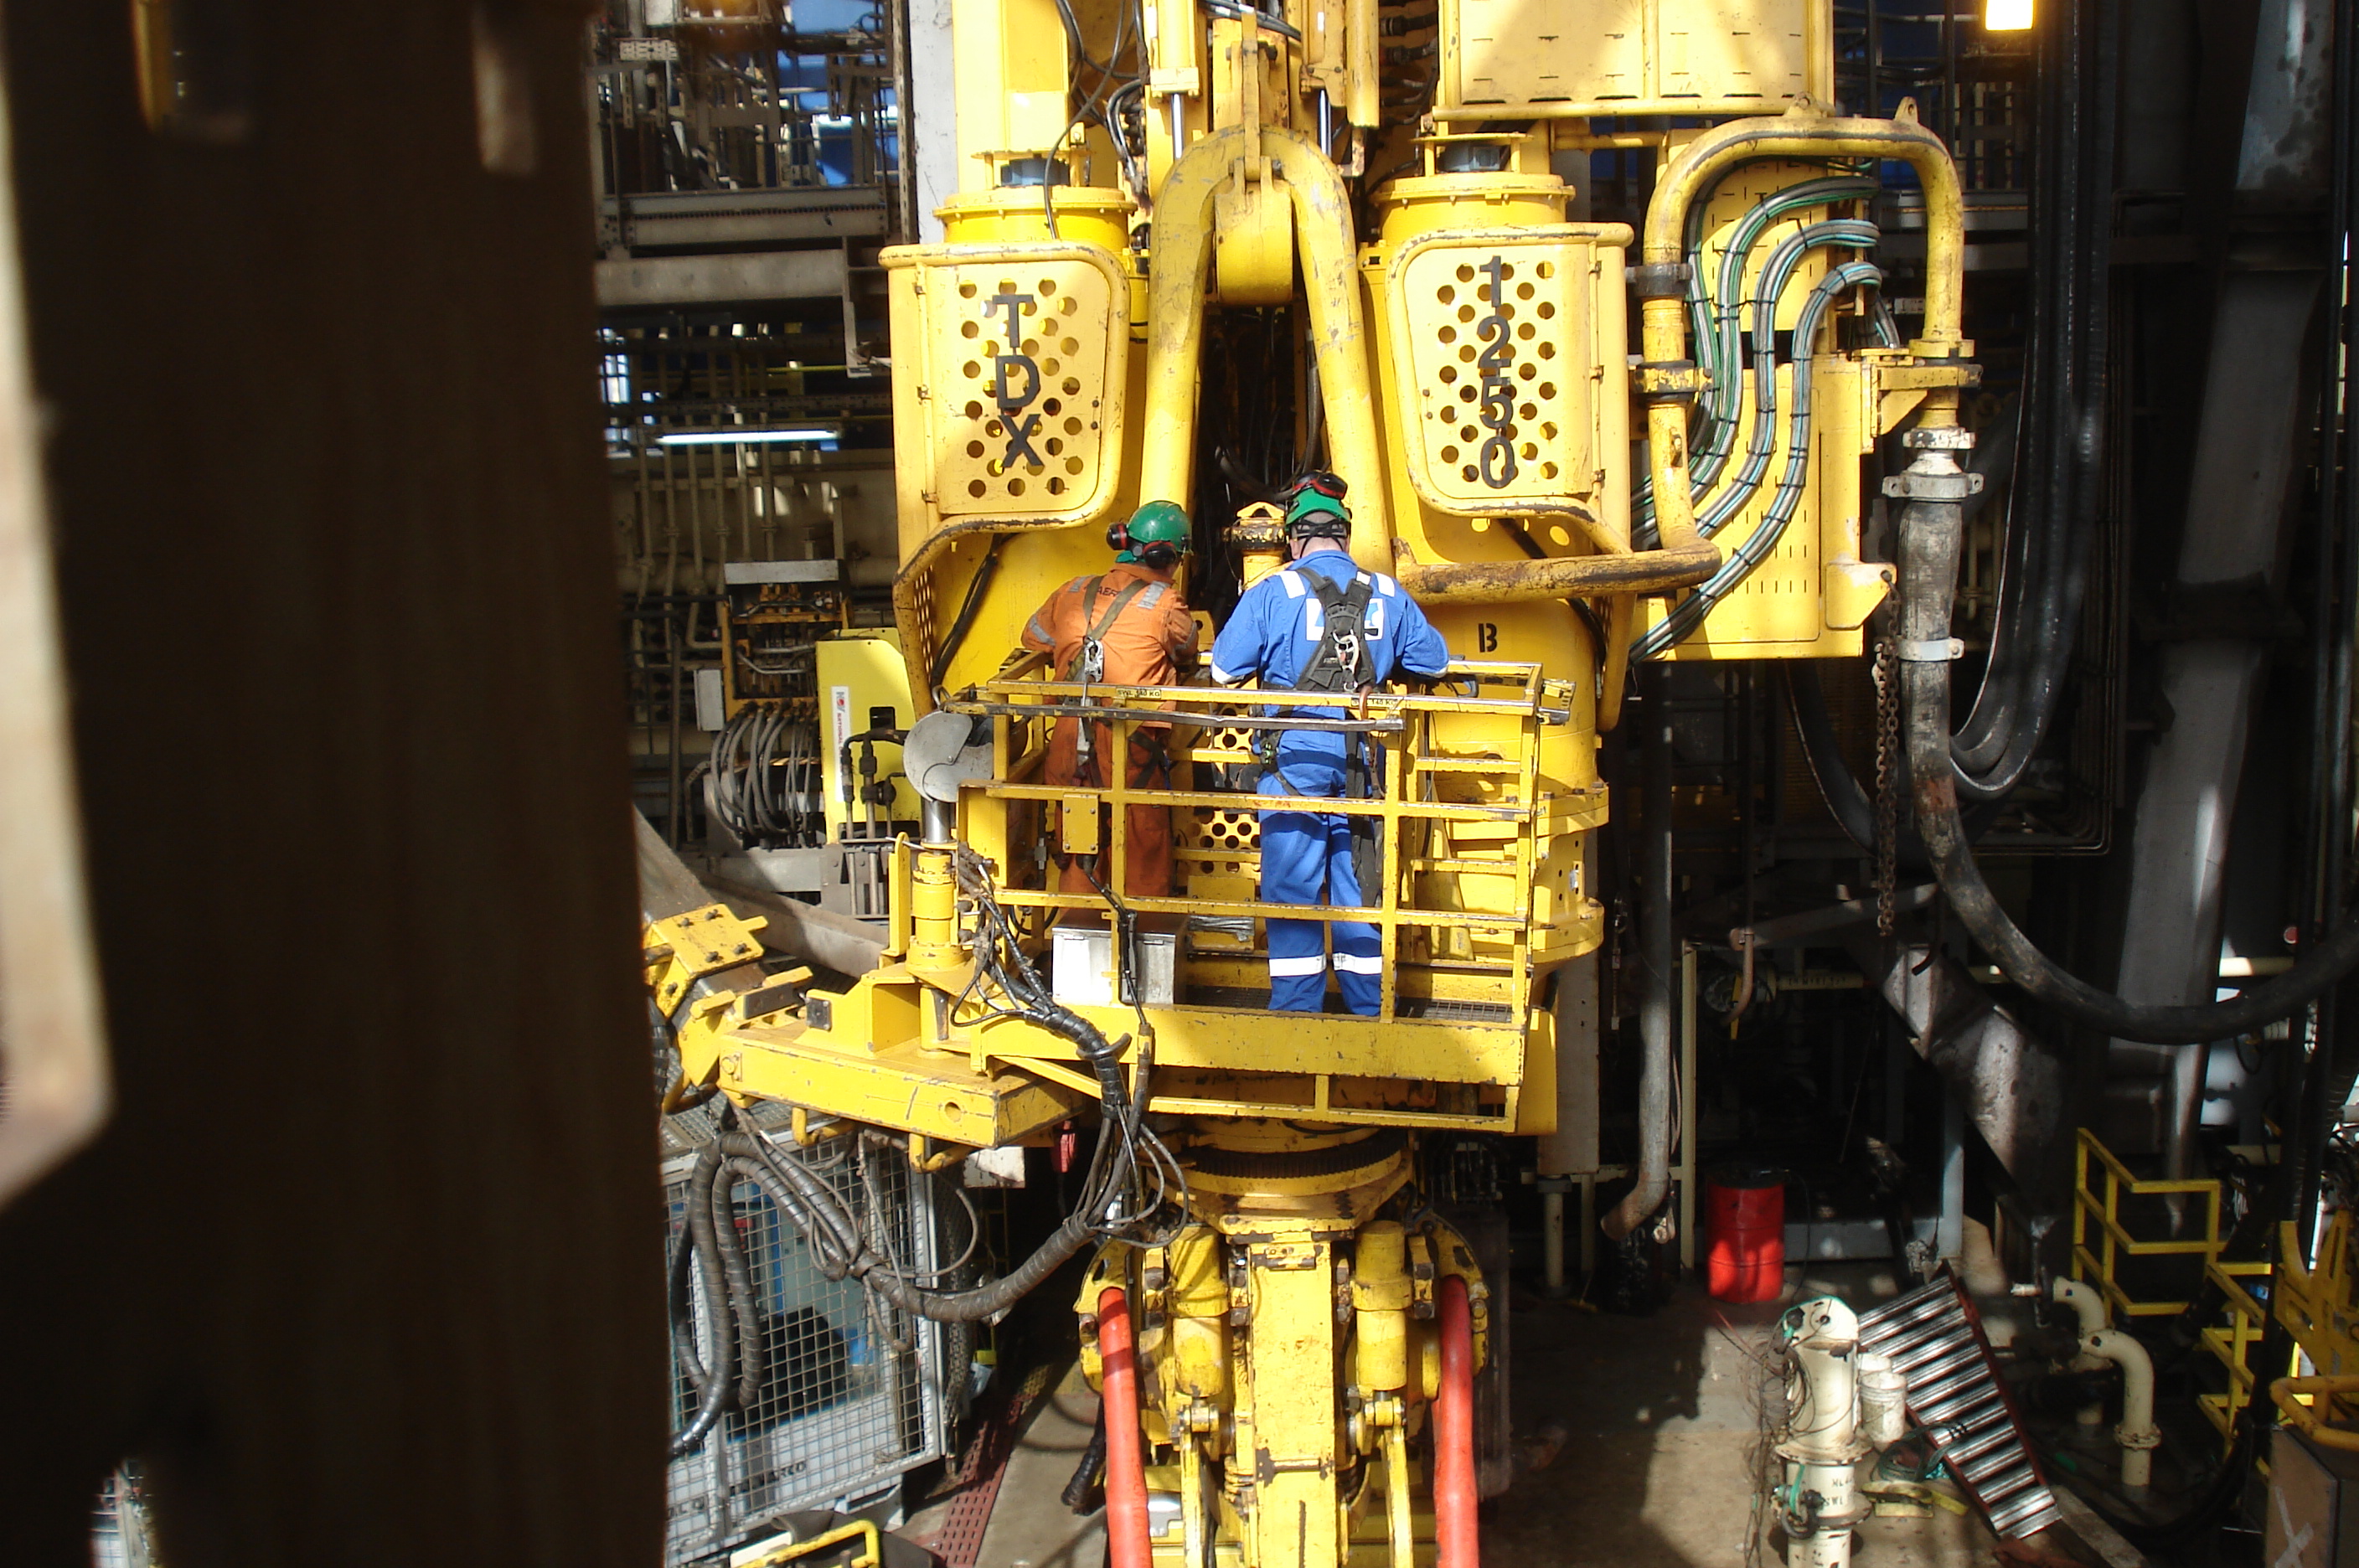 UK firm goes to West Africa for rig ops